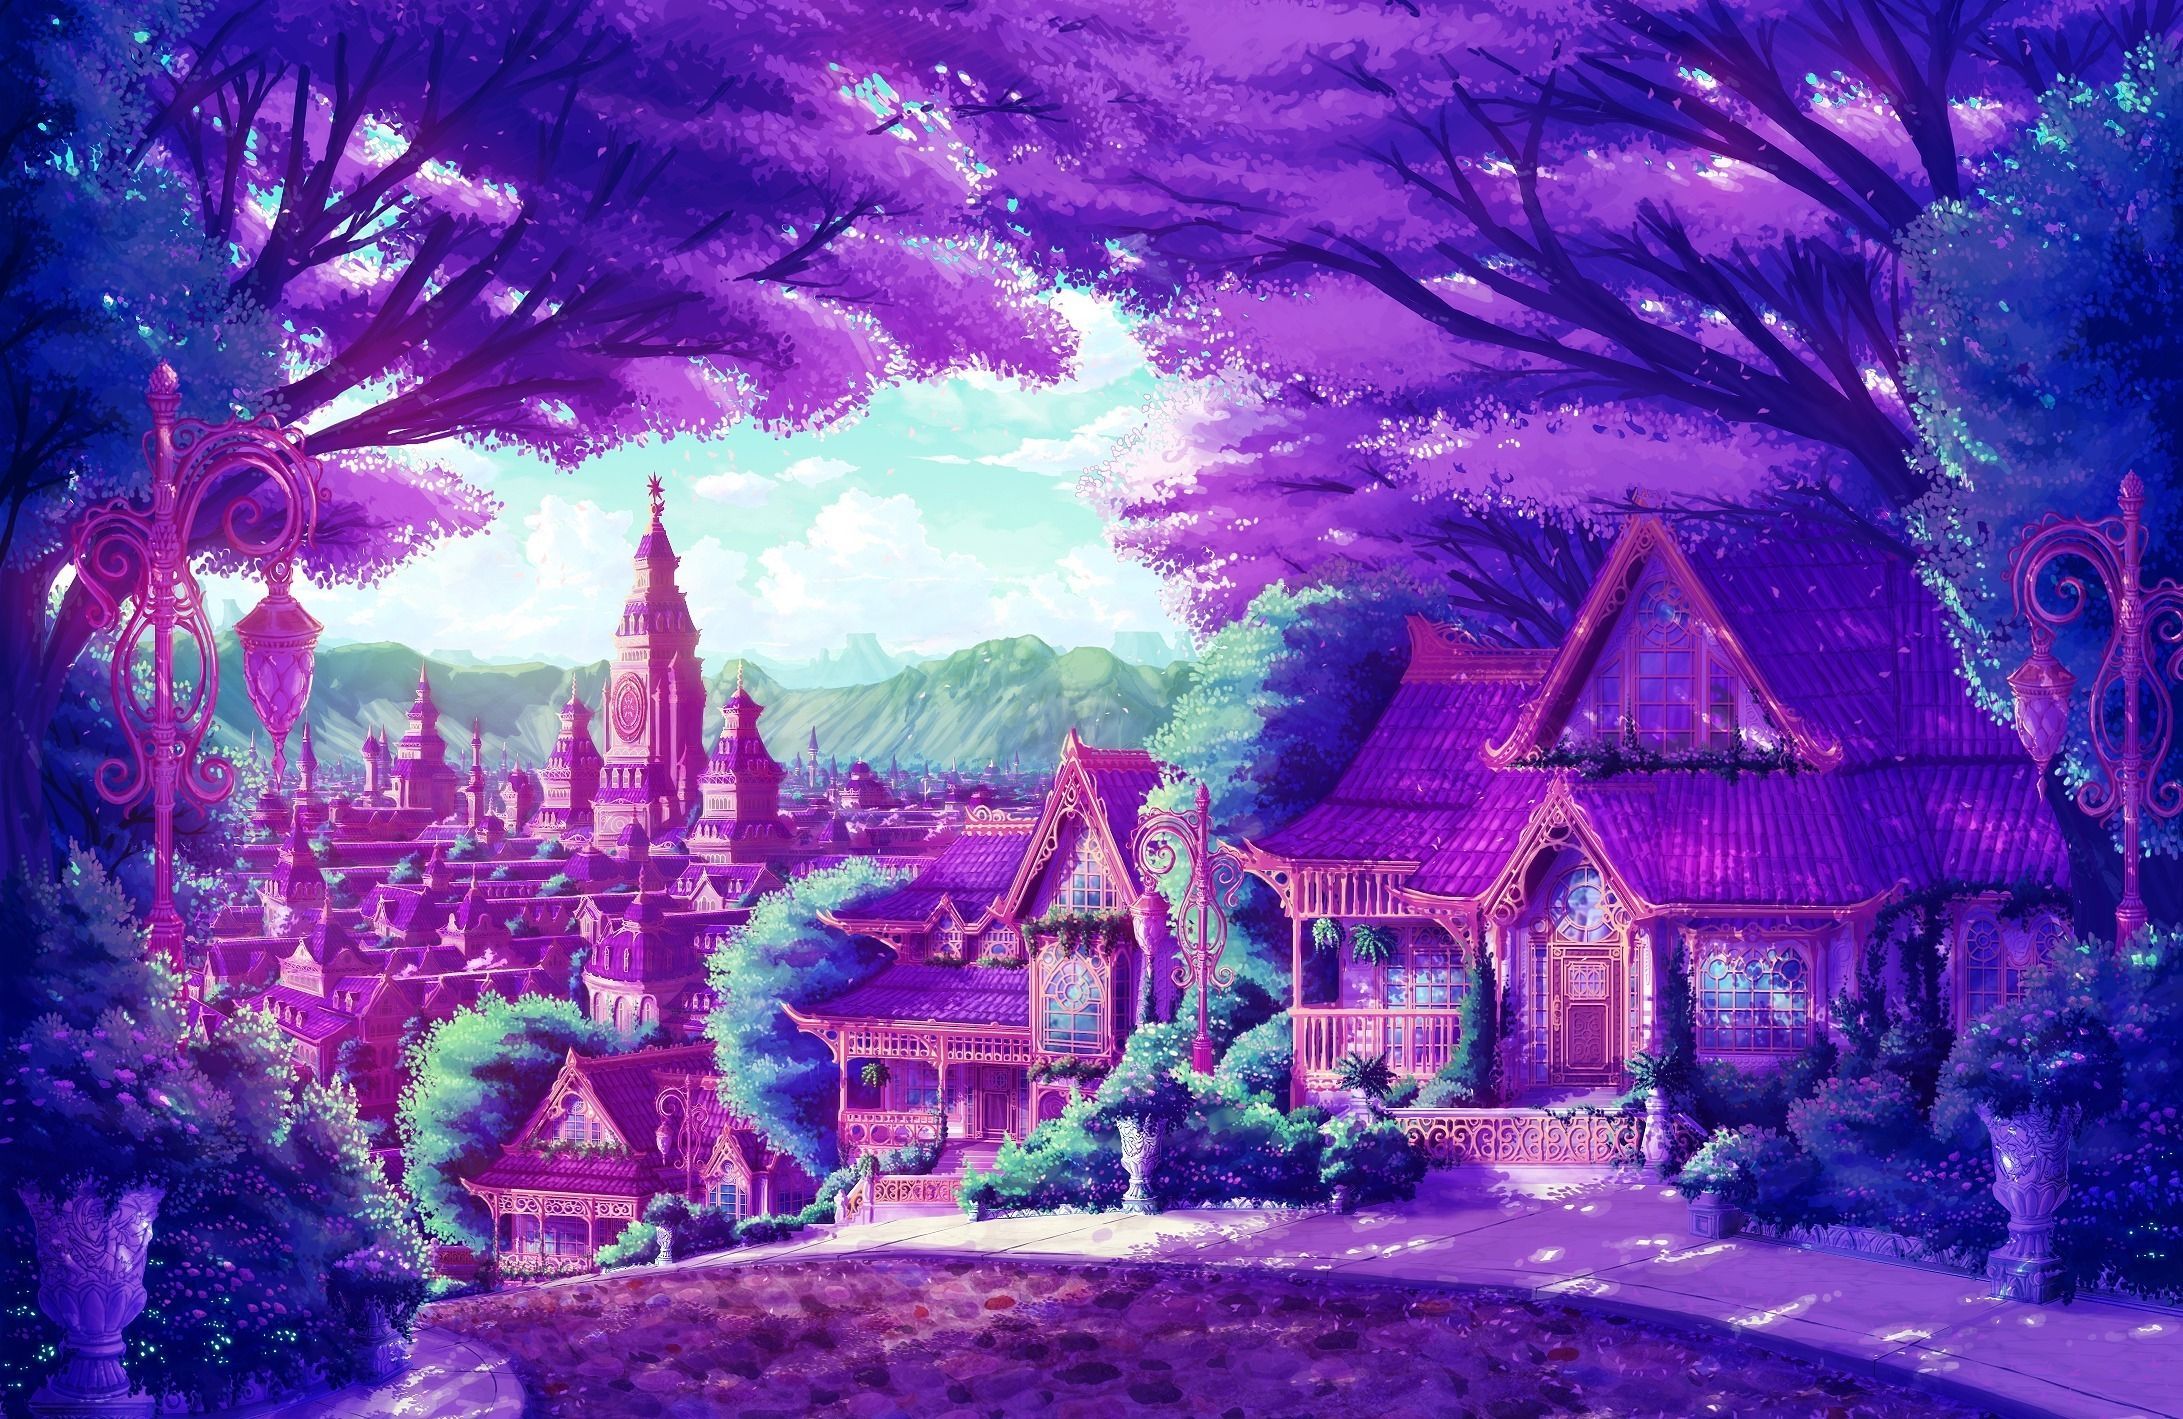 anime cities Search. Anime scenery